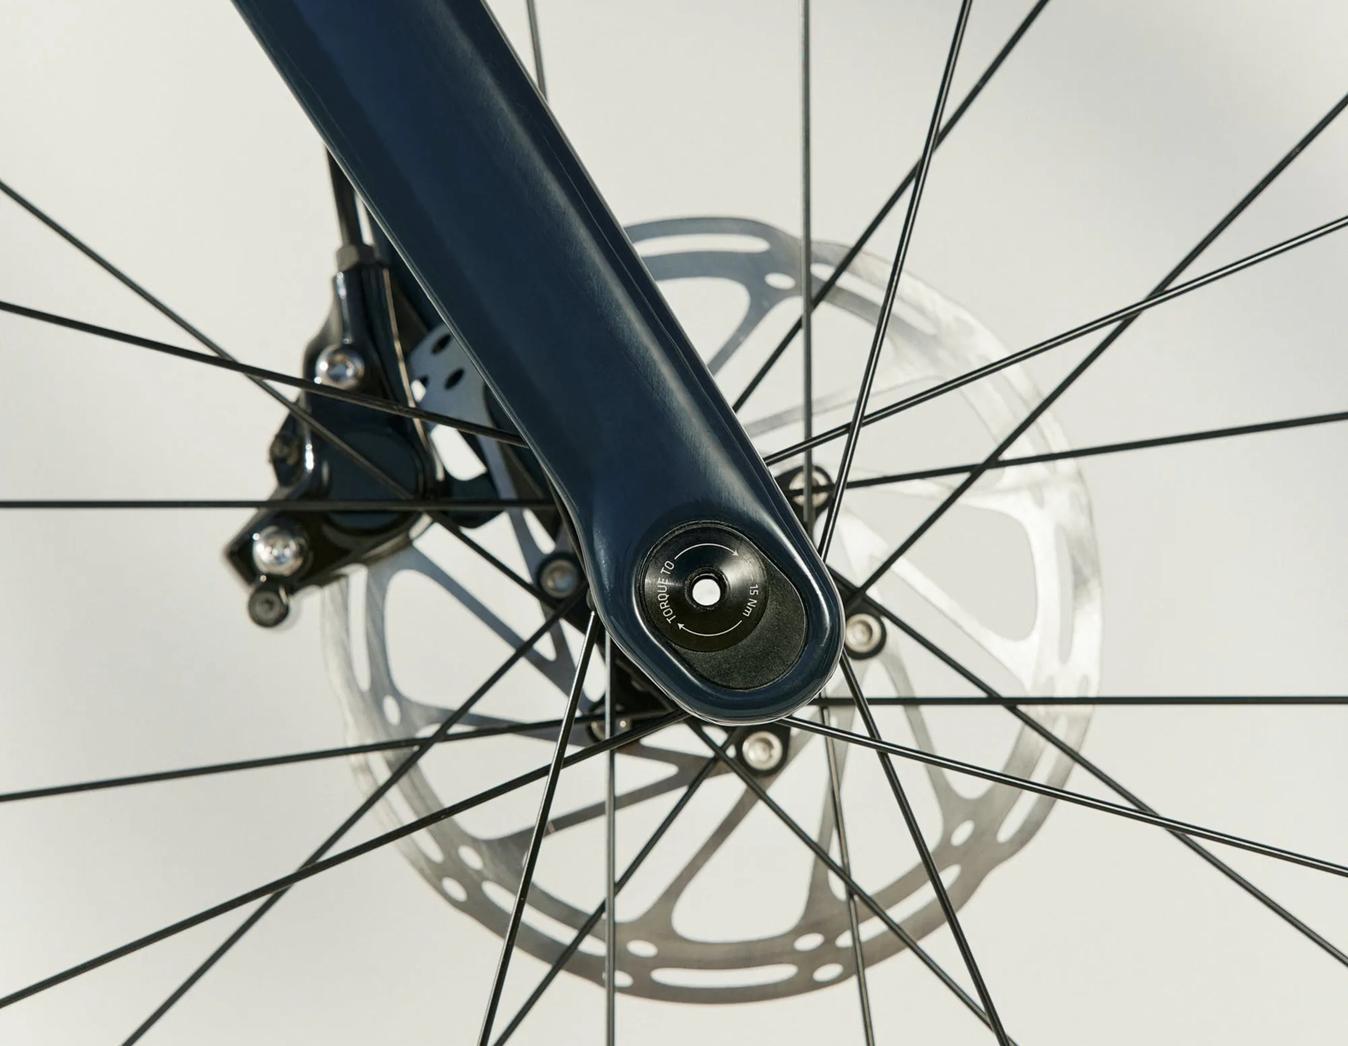 The dropouts feature adjustable geometry to change the ride characteristics of the bike